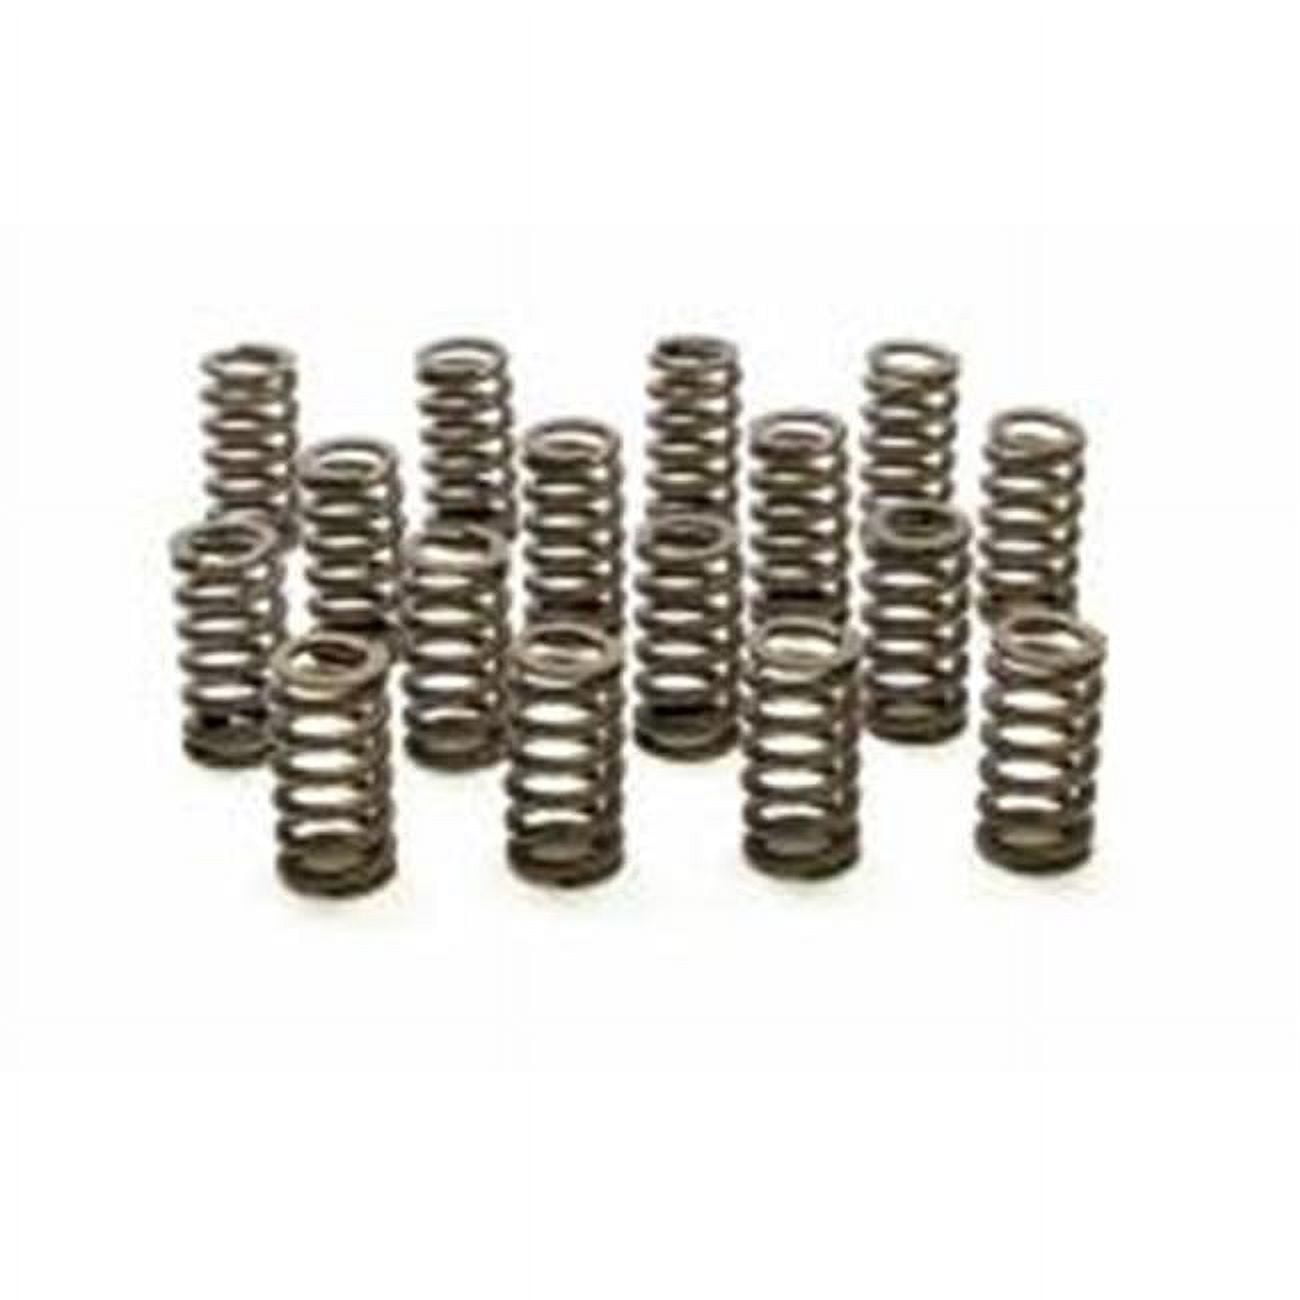 324 lbs Spring Rate 1.04 in. Coil Bind 0.90 in. OD 1200 Series Valve Ovate Beehive Spring for Ford Modular - Set of 16